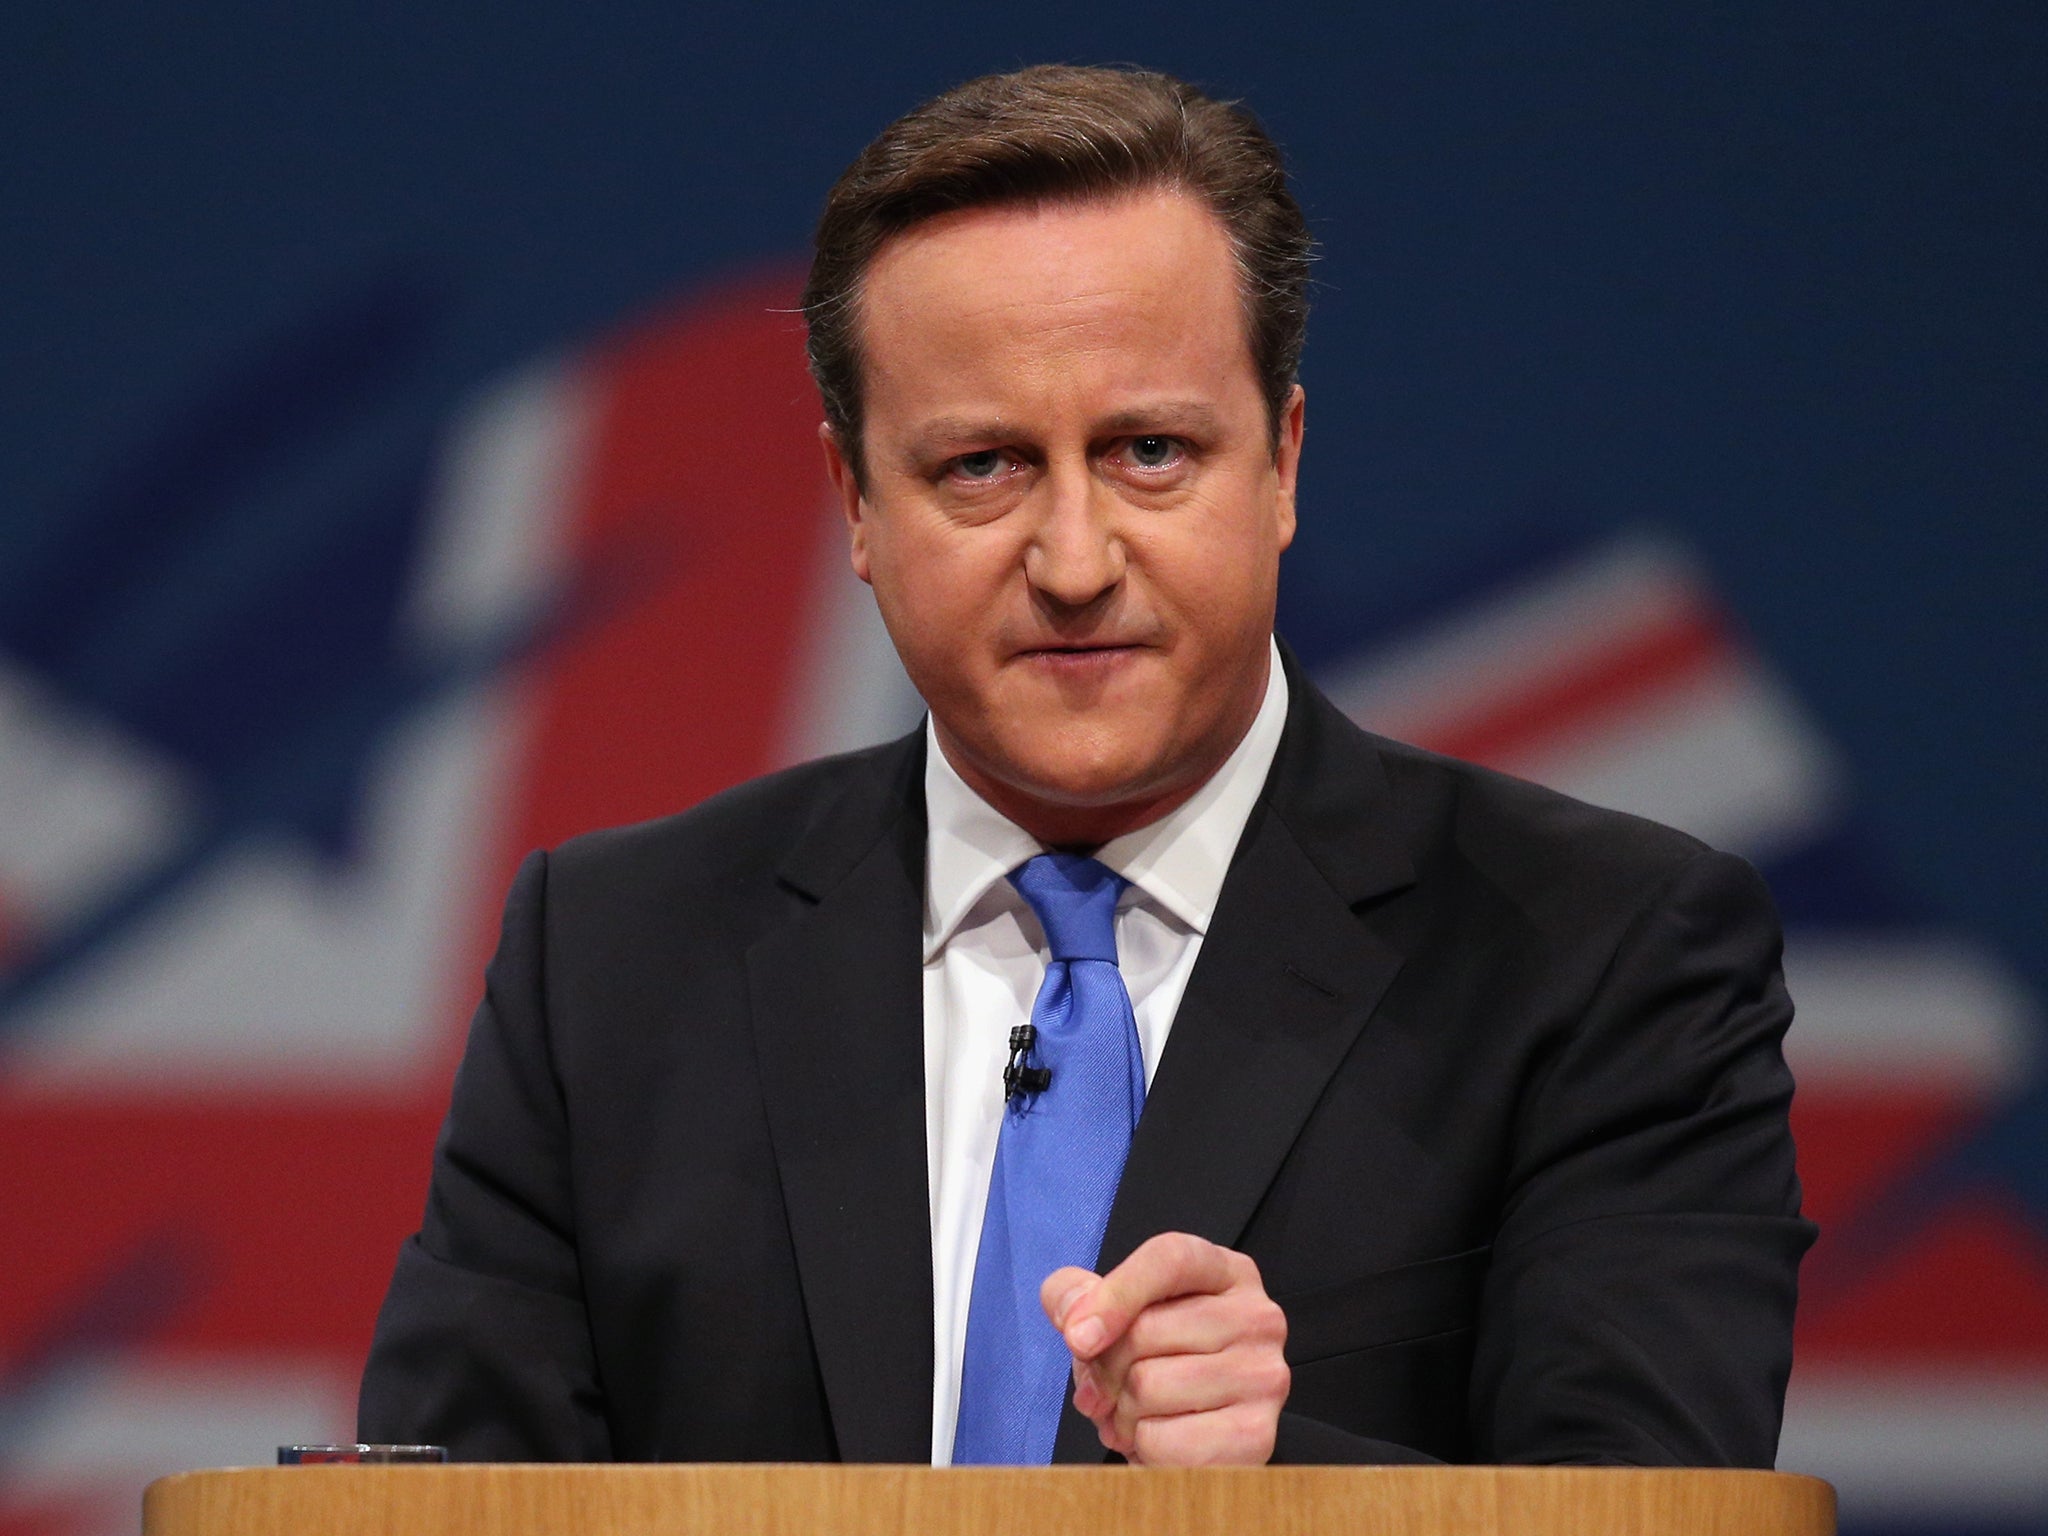 David Cameron was criticised for his delay in condemning Israel for its attacks in Gaza last summer